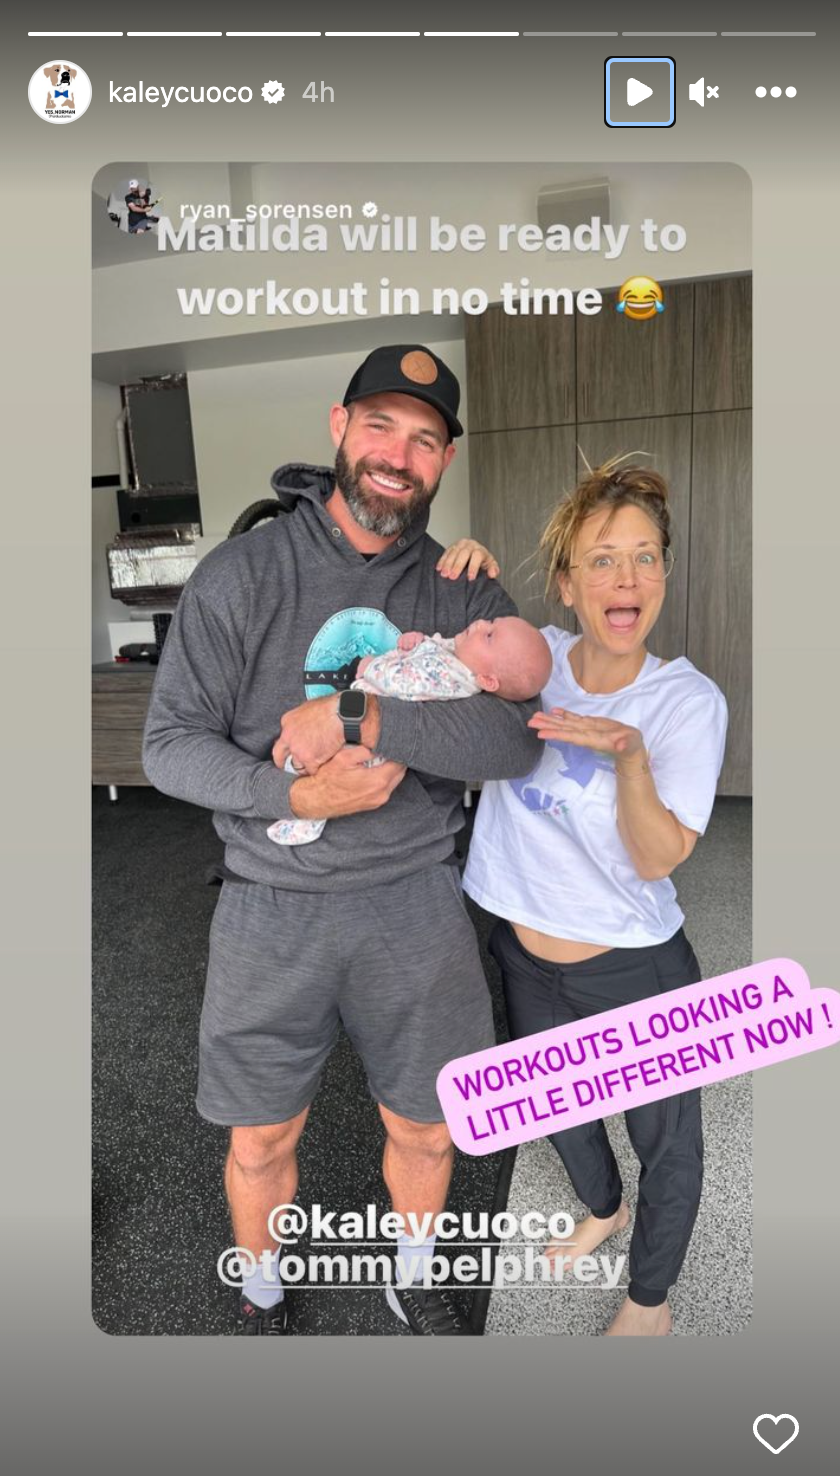 Kaley Cuoco returns to the gym one month after giving birth